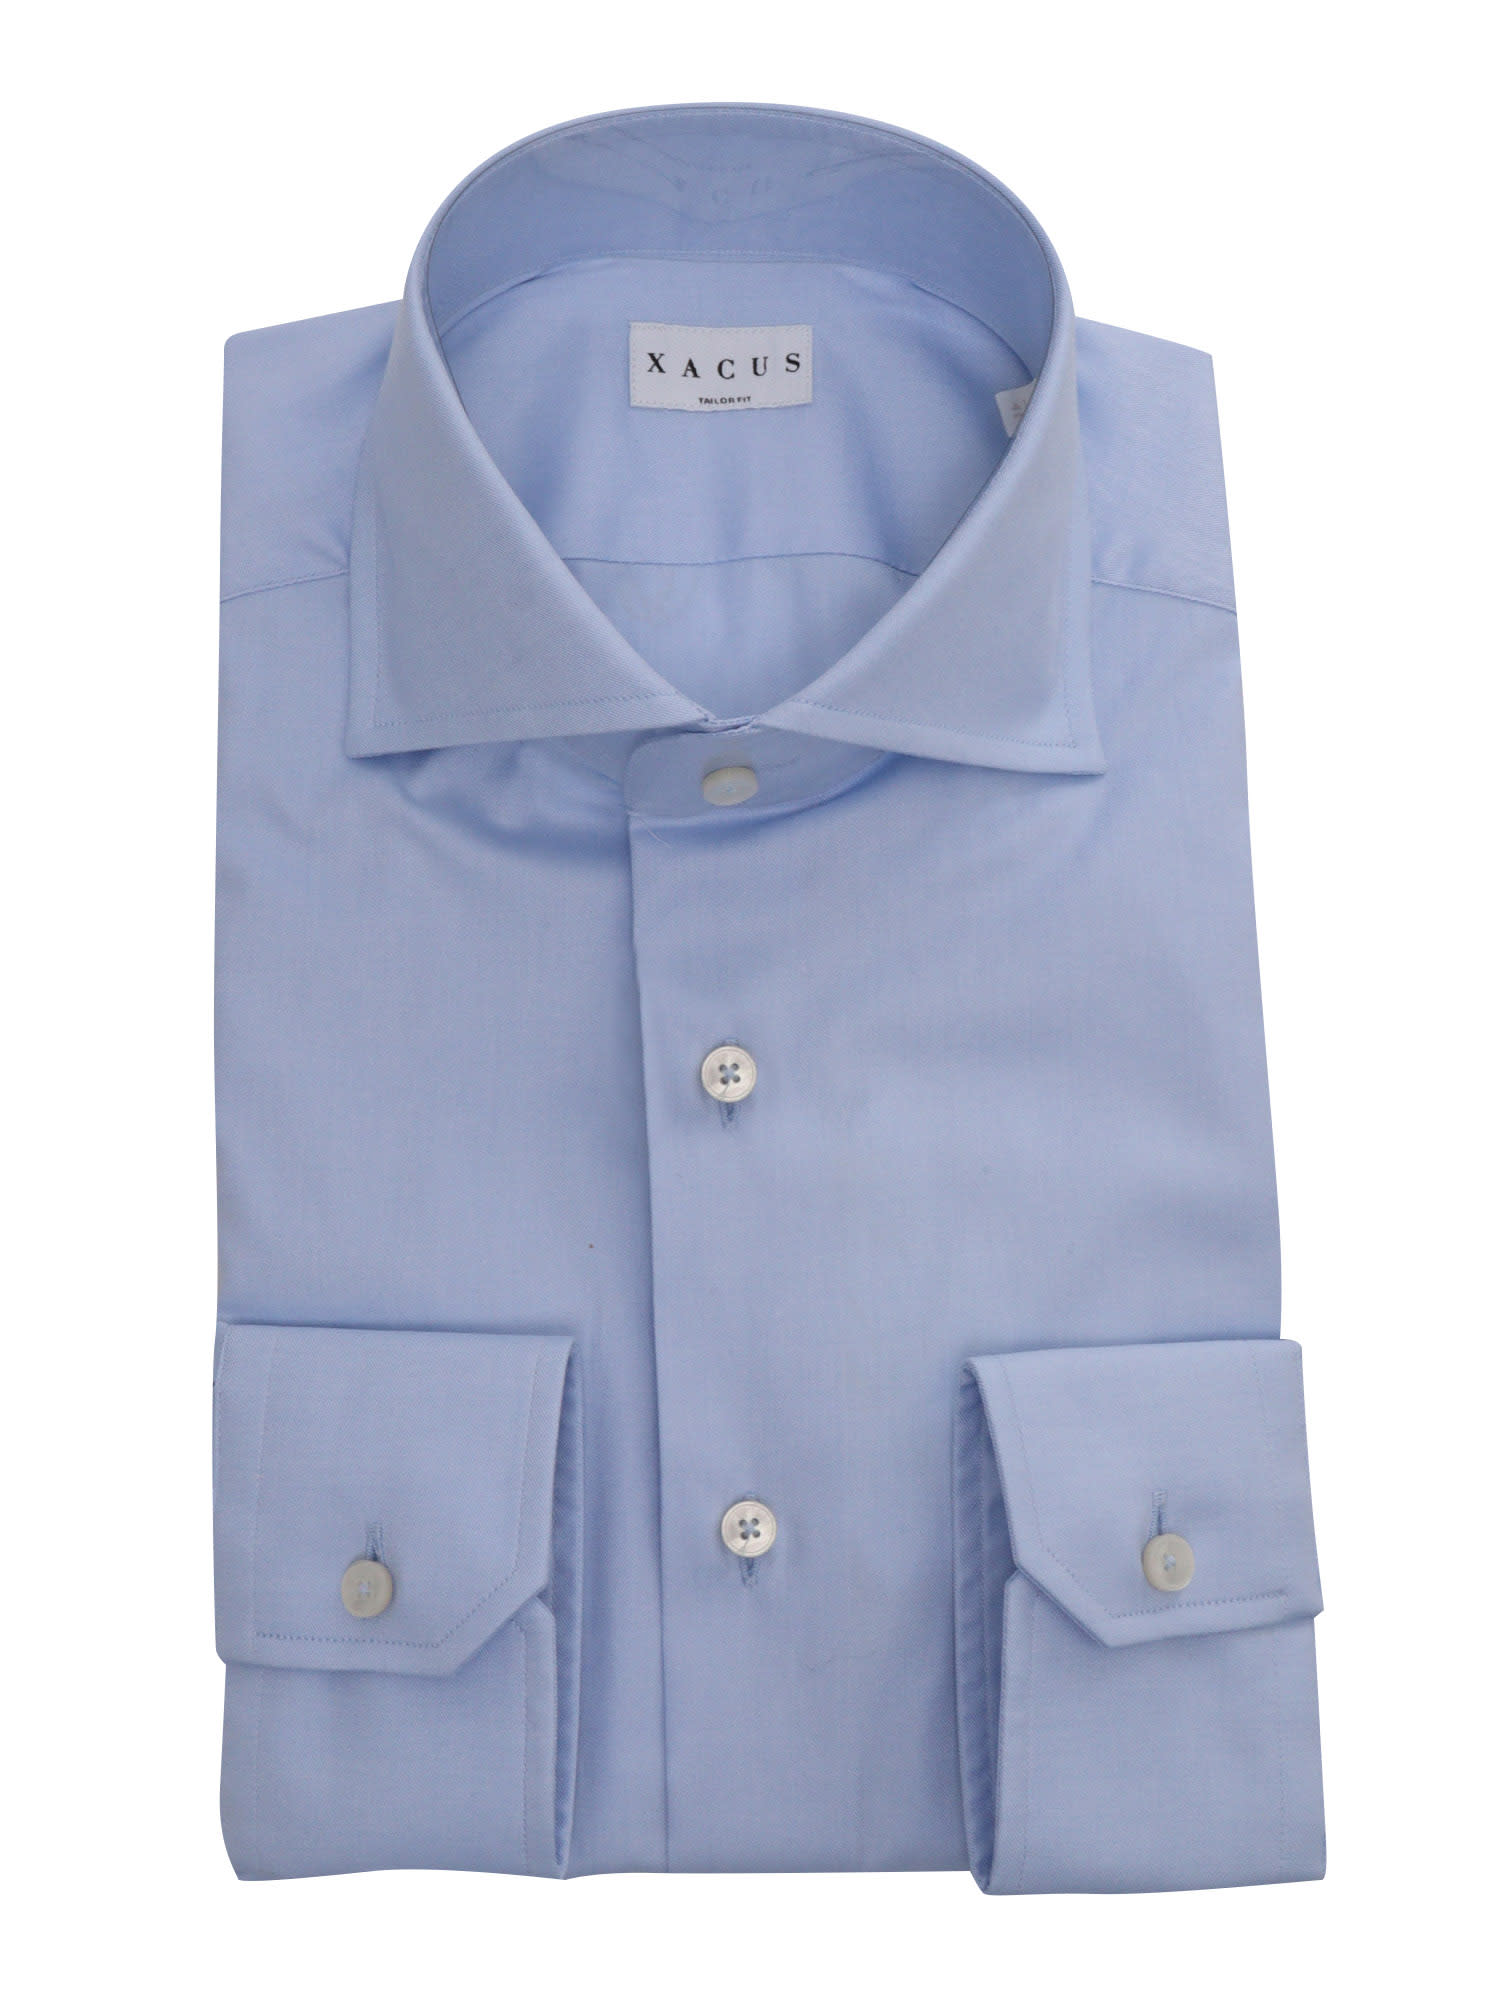 Xacus Light Blu Shirt With Pockets In Multicolor